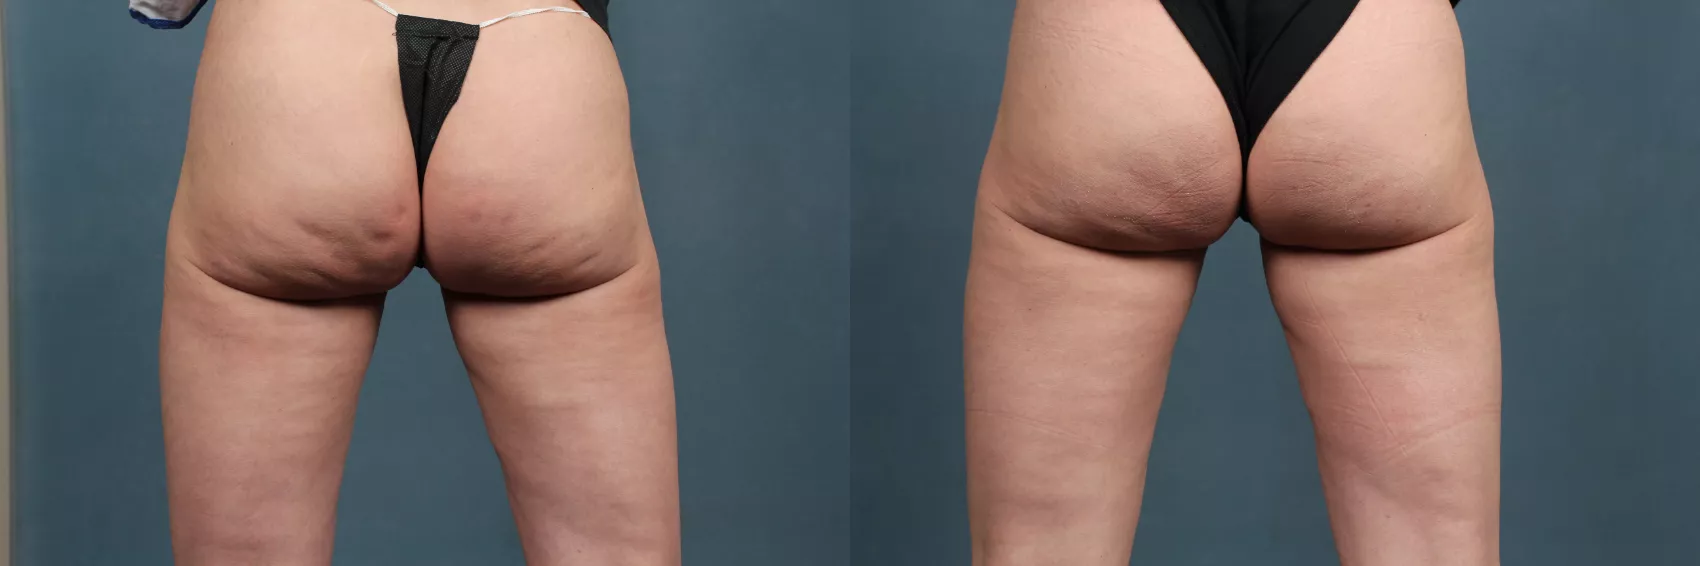 Cellulite Treatment before and after 4 weeks! Incredible